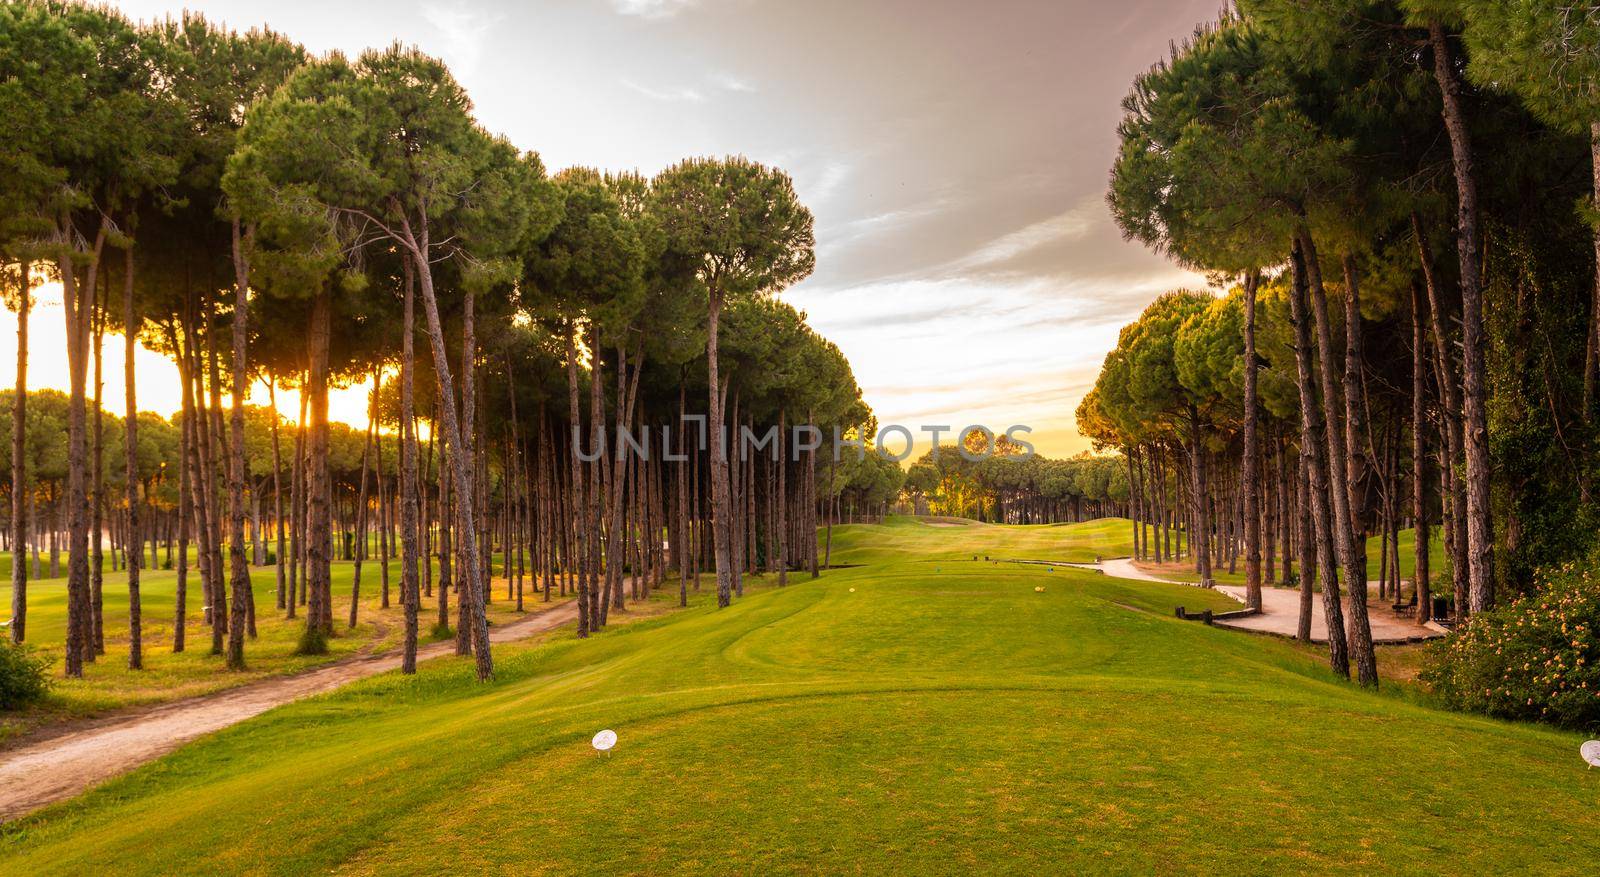 teeing area at Golf course at sunset with beautiful sky. Scenic panoramic view of golf fairway